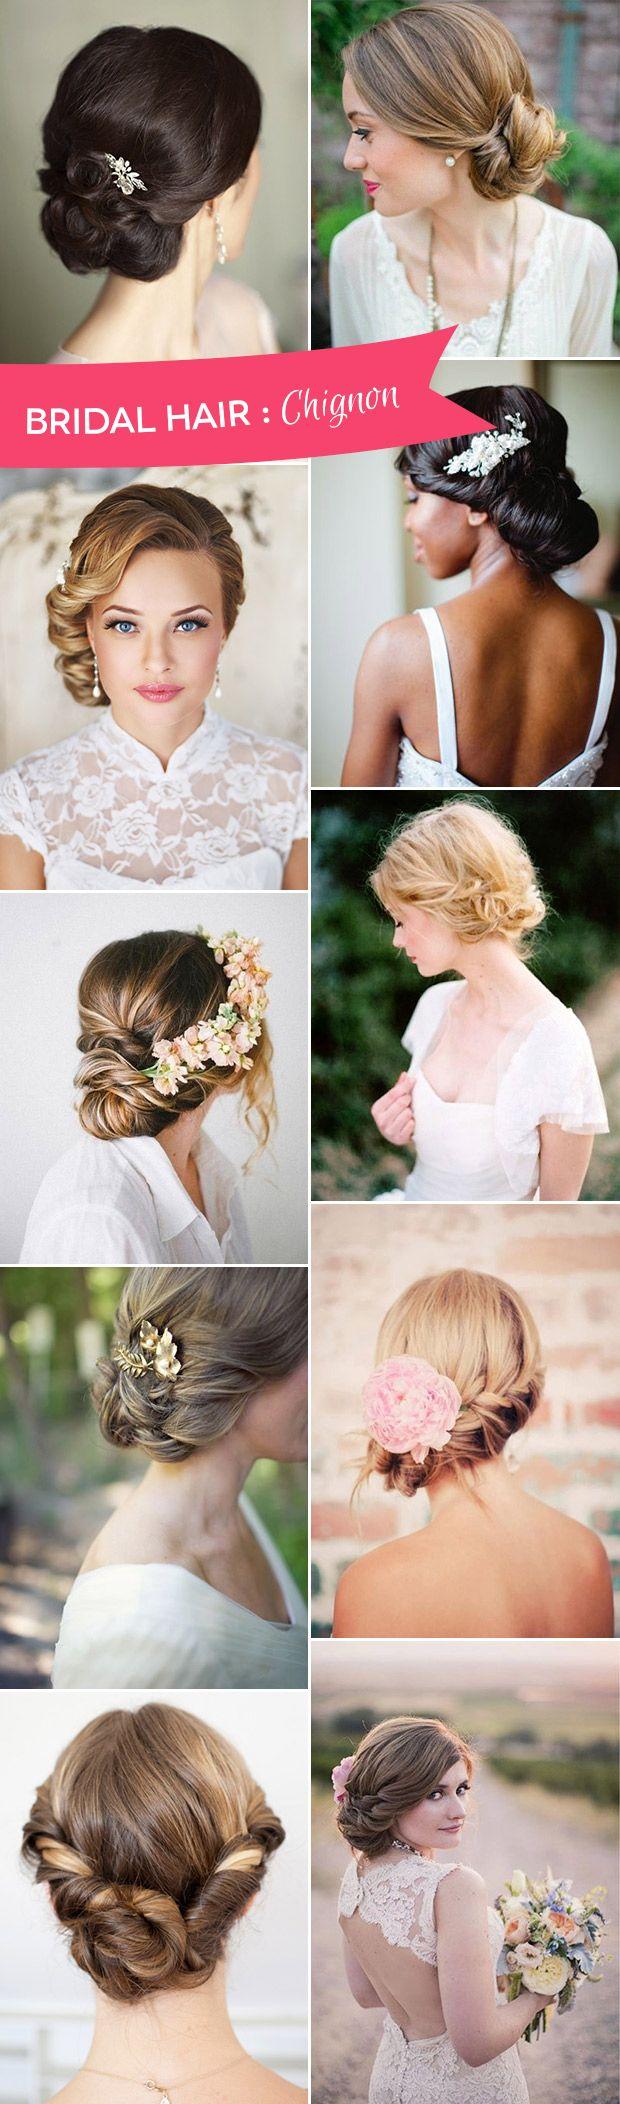 Свадьба - The Charm Of Chignons - The Simplest Wedding Hairstyle